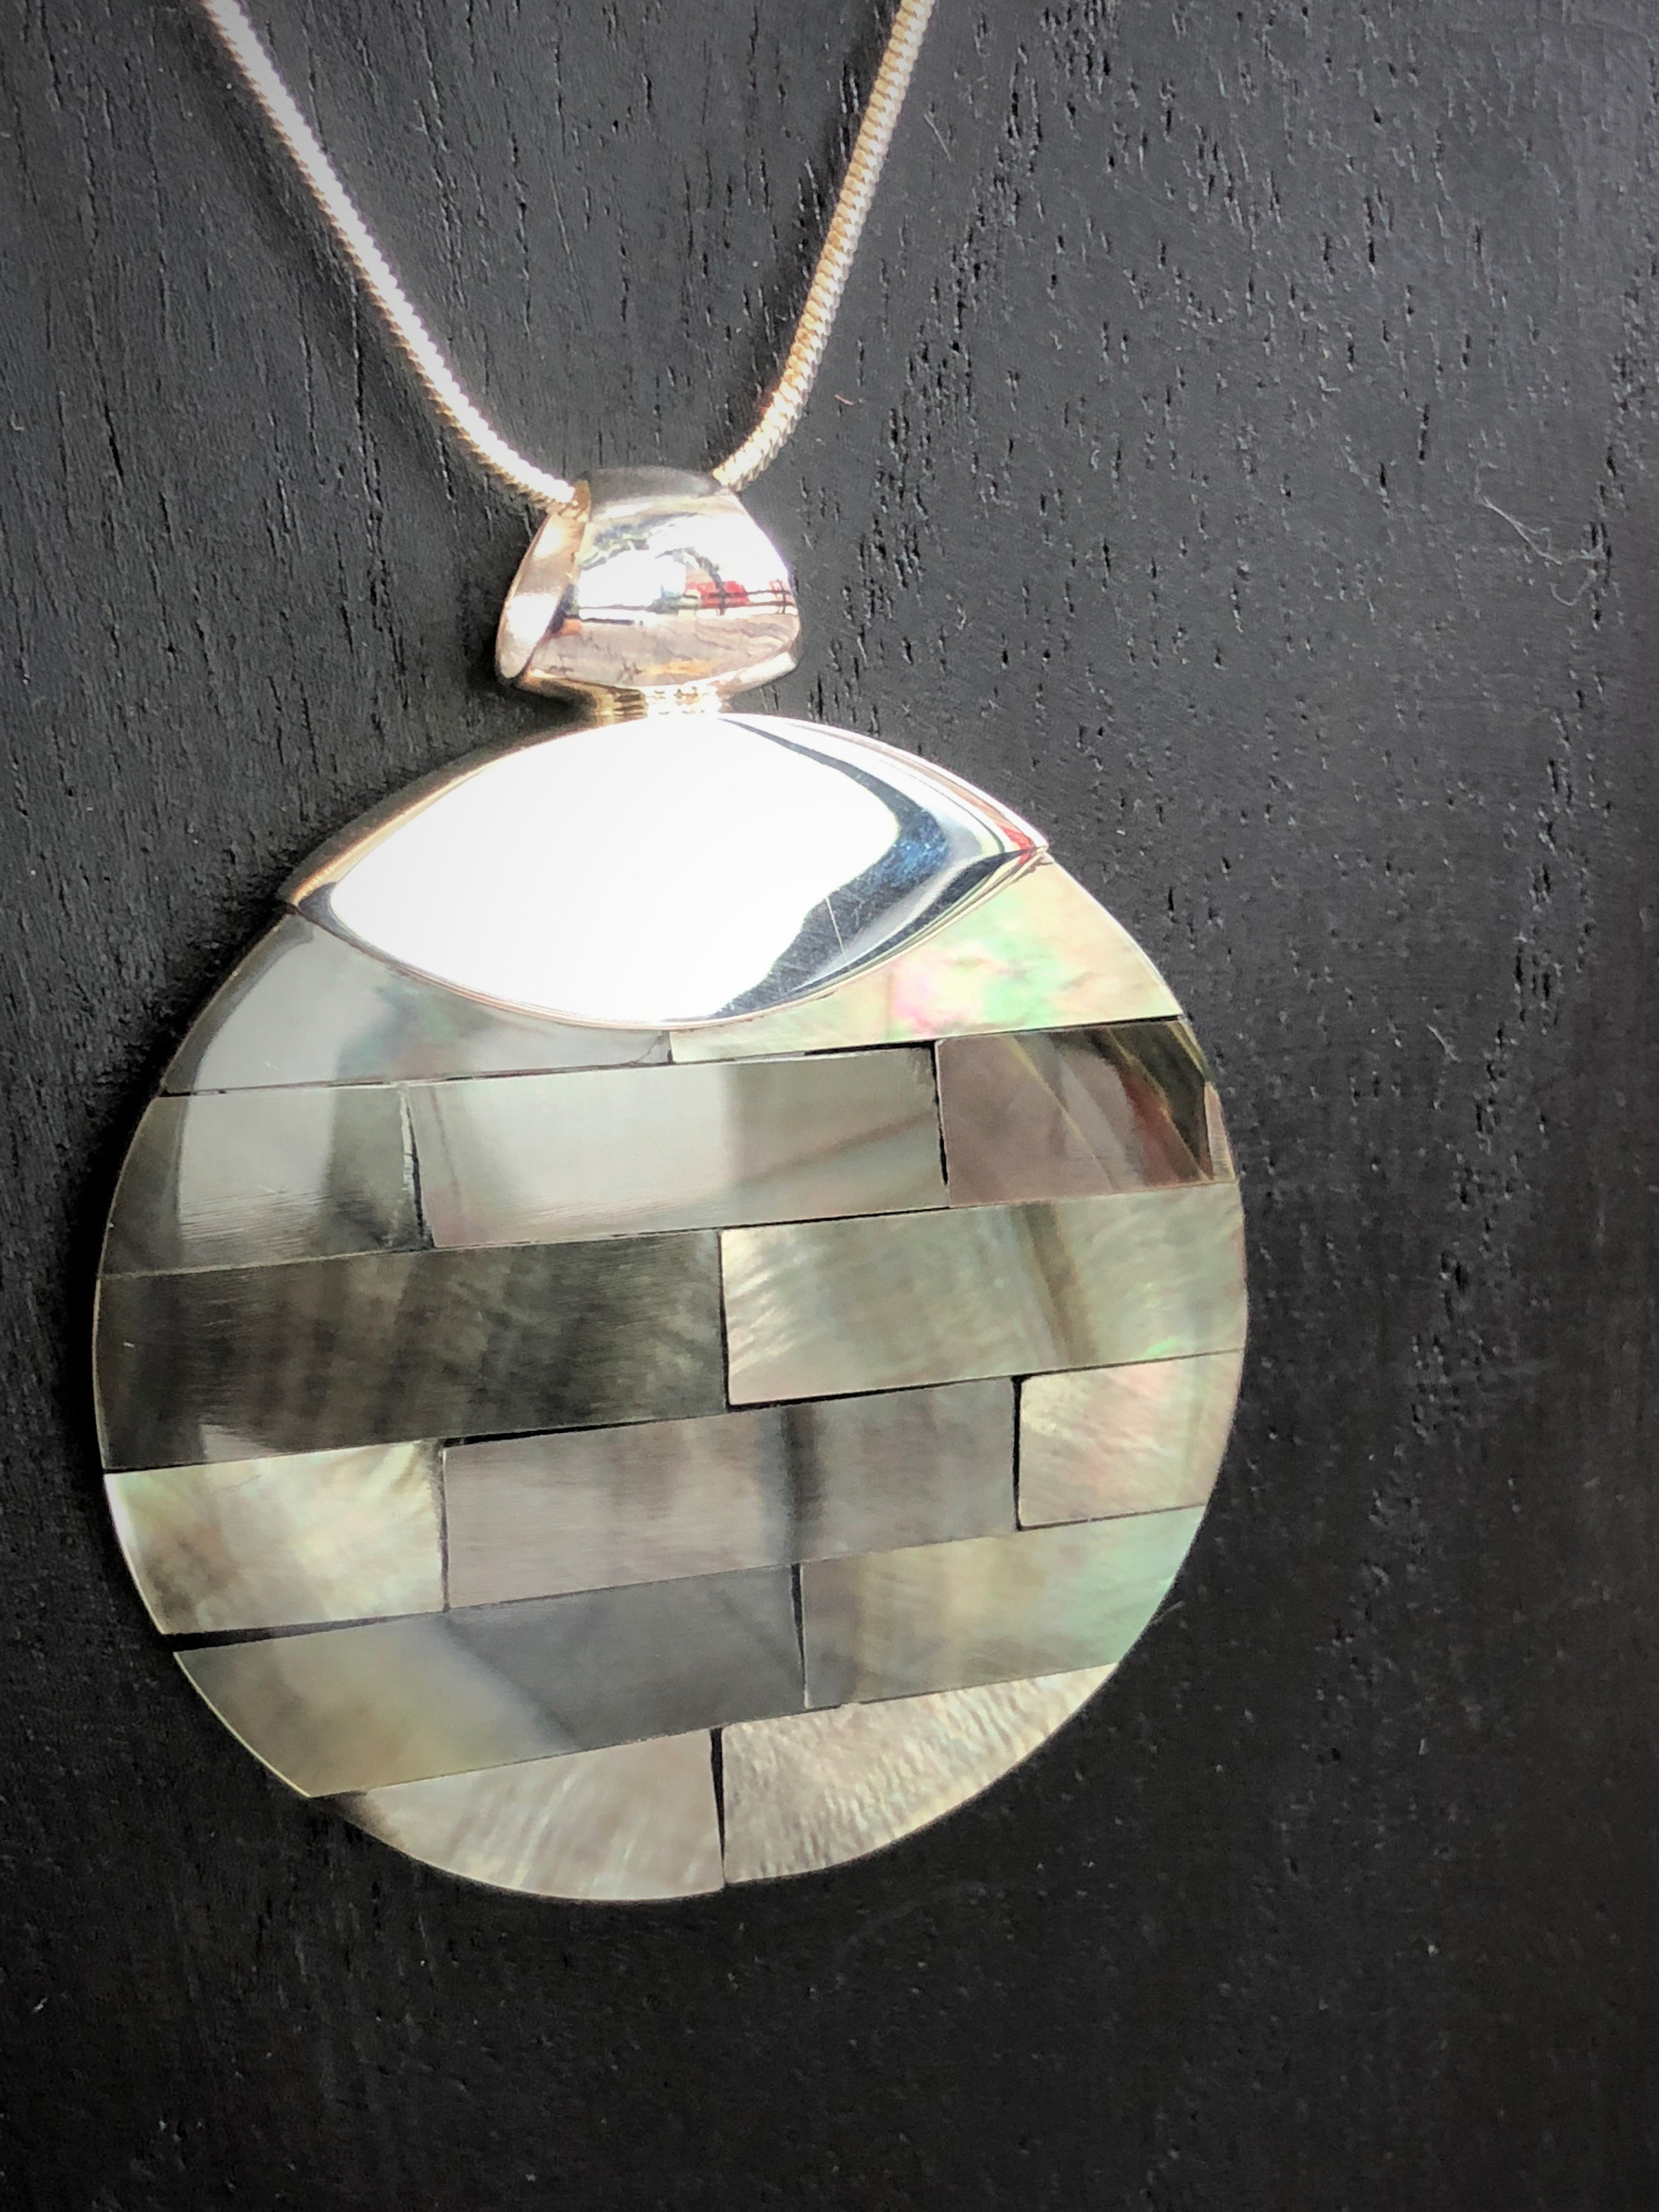 Mother Of Pearl Pendant with Silver Clasp